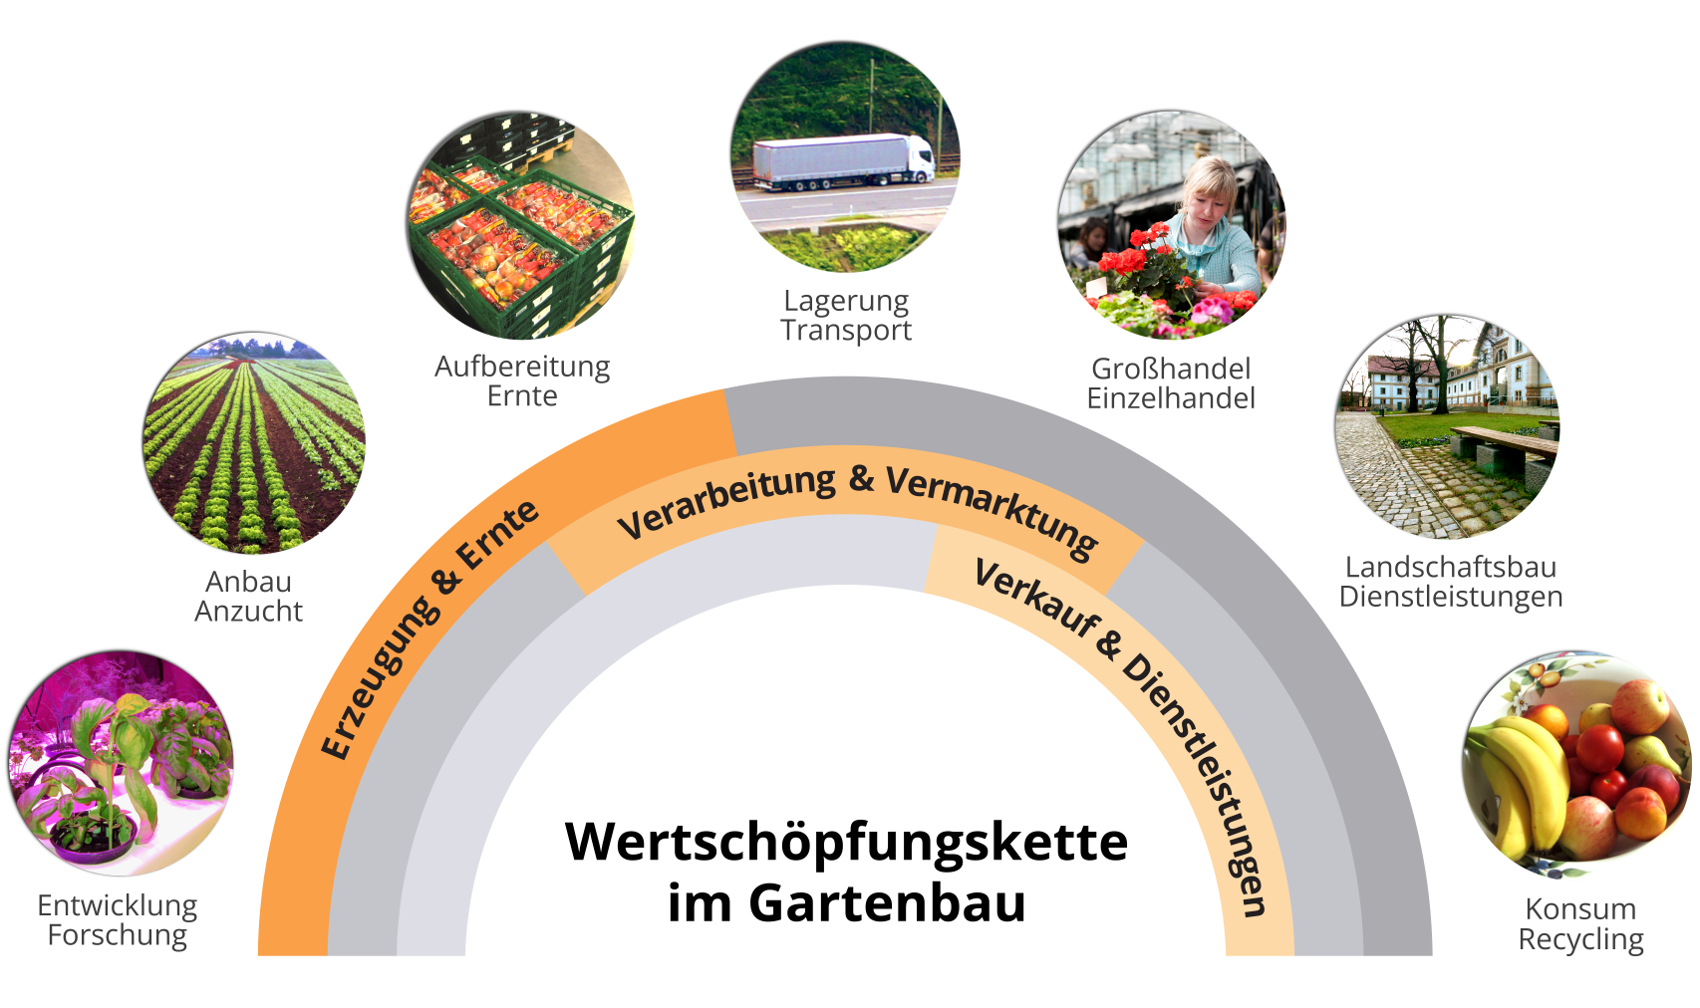 Graphic of the value chain in horticulture, a semicircle consisting of 3 strips, the upper strip says "Production and Harvesting", the middle strip says "Processing and Marketing", the lower strip says: "Sales and Services", above the semicircle 7 photos are arranged evenly, also in a semicircle, the photos are subtitled, in order from left to right: Development/Research, Cultivation/Cultivation, Preparation/Harvest, Storage/Transport, Wholesale and Retail Trade, Landscaping/Services, Consum/Recycling.